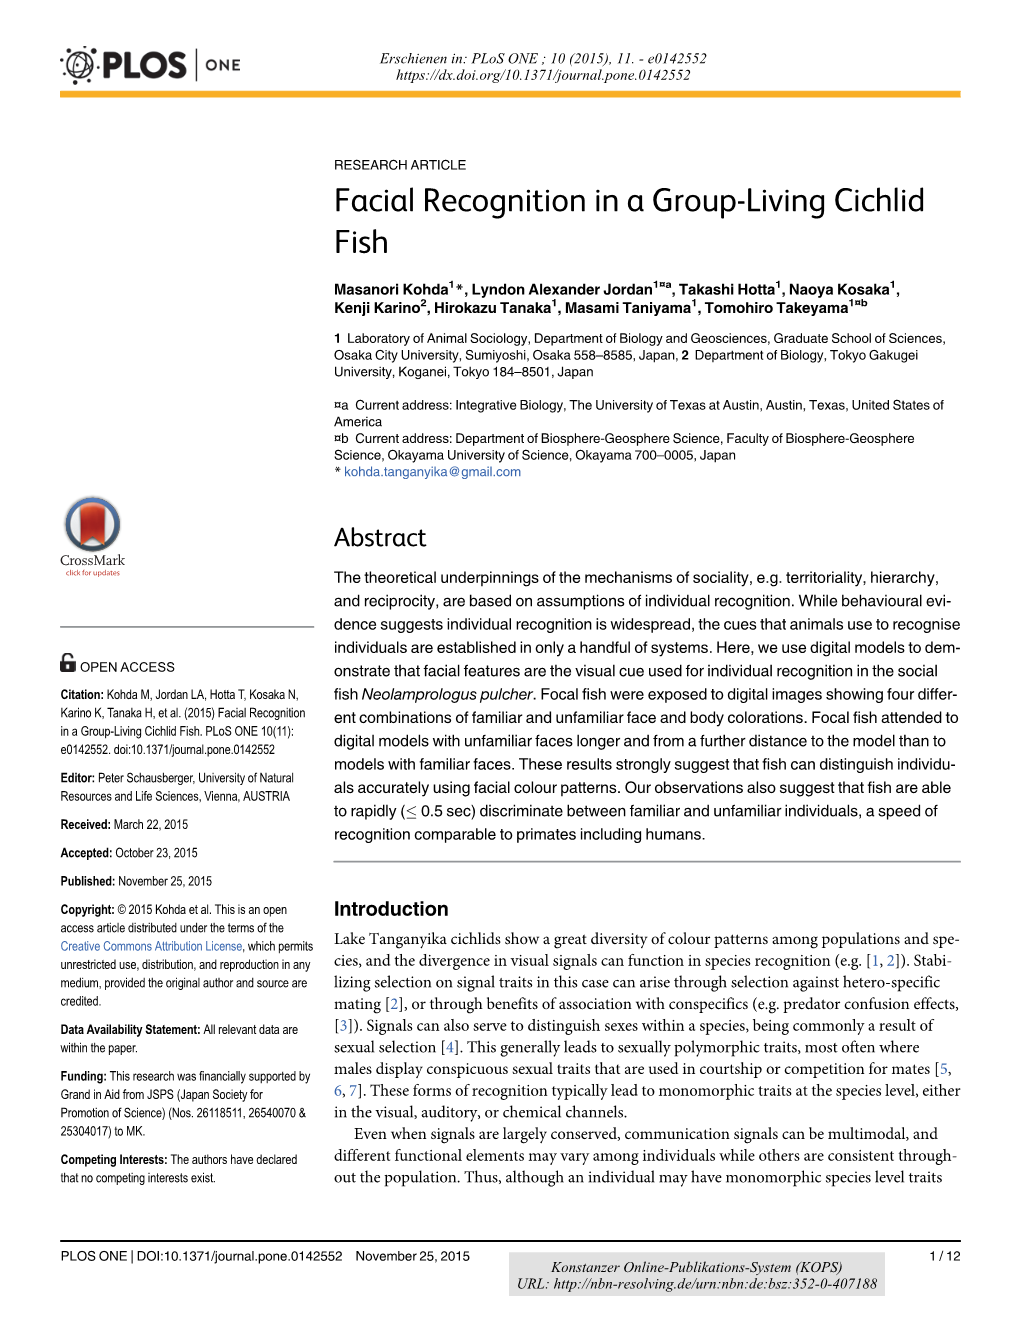 Facial Recognition in a Group-Living Cichlid Fish